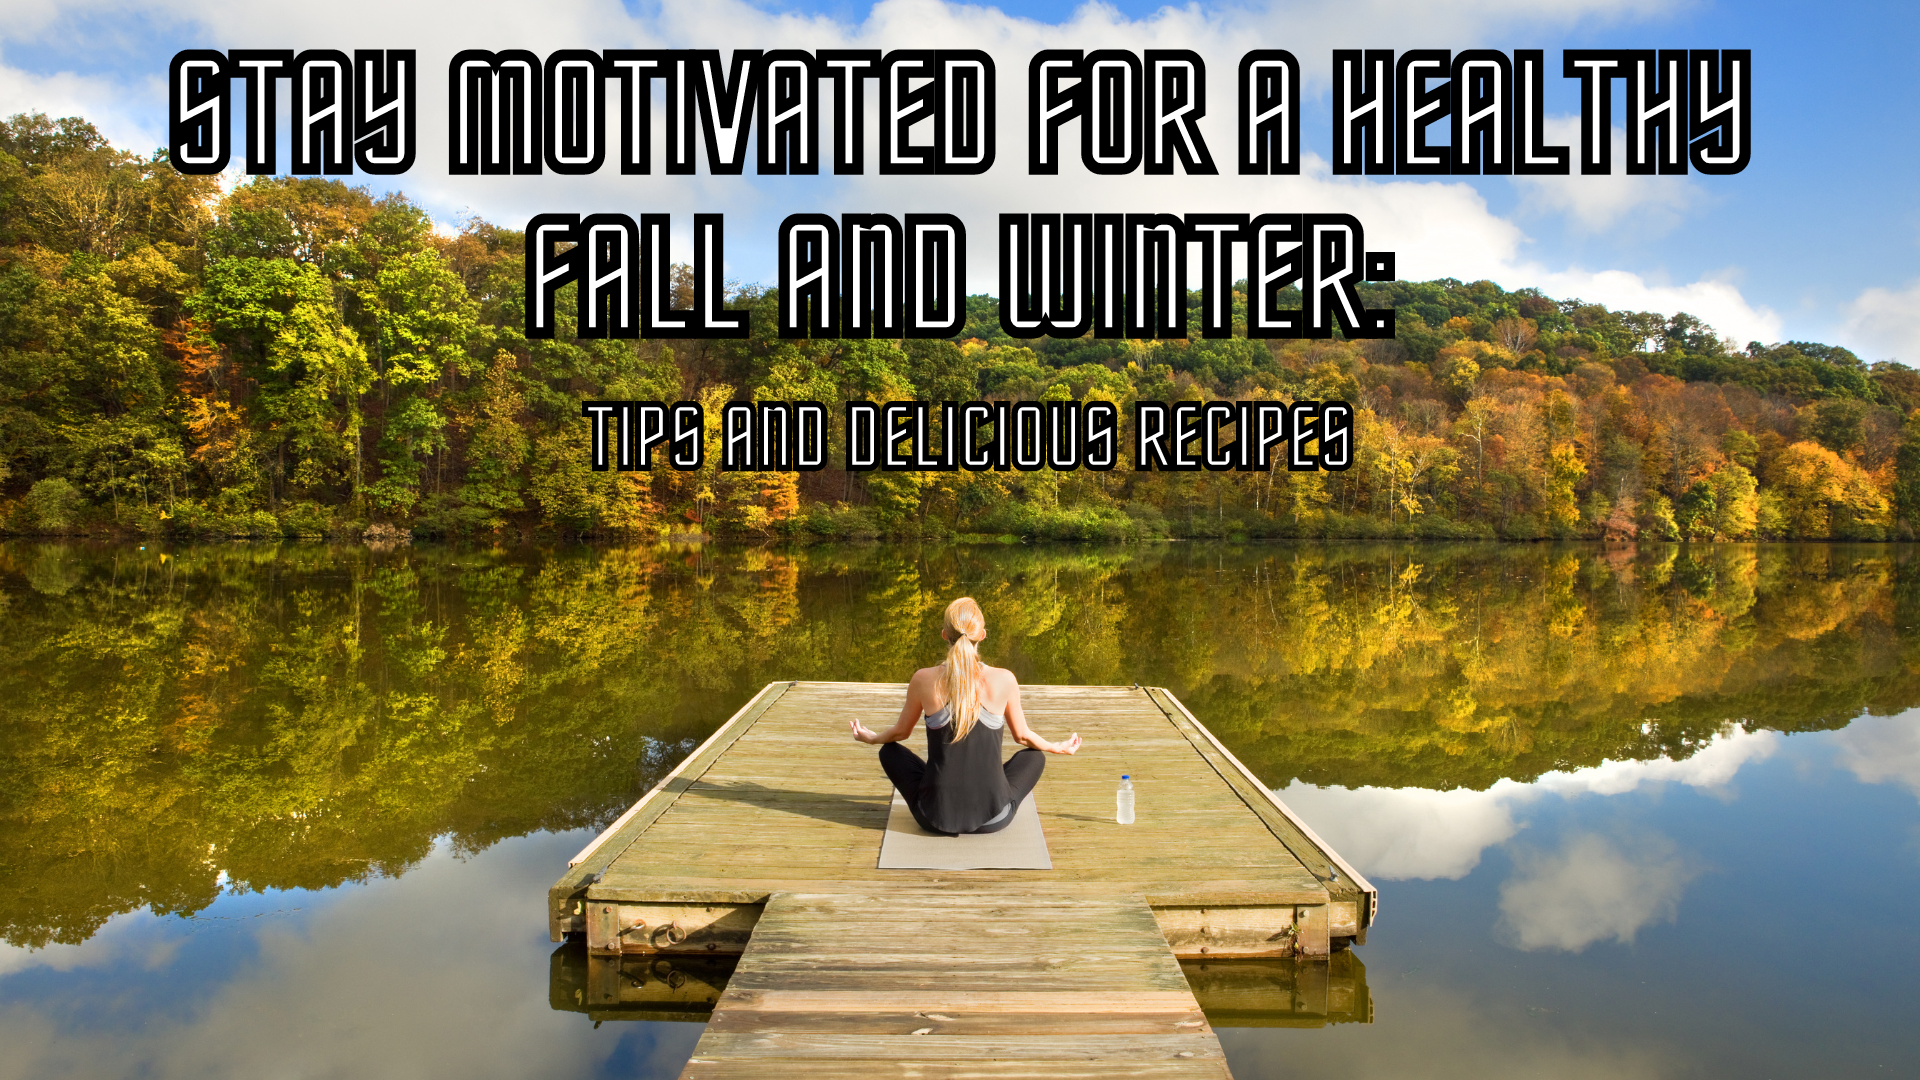 Stay Motivated for a Healthy Fall and Winter: Tips and Delicious Recipes